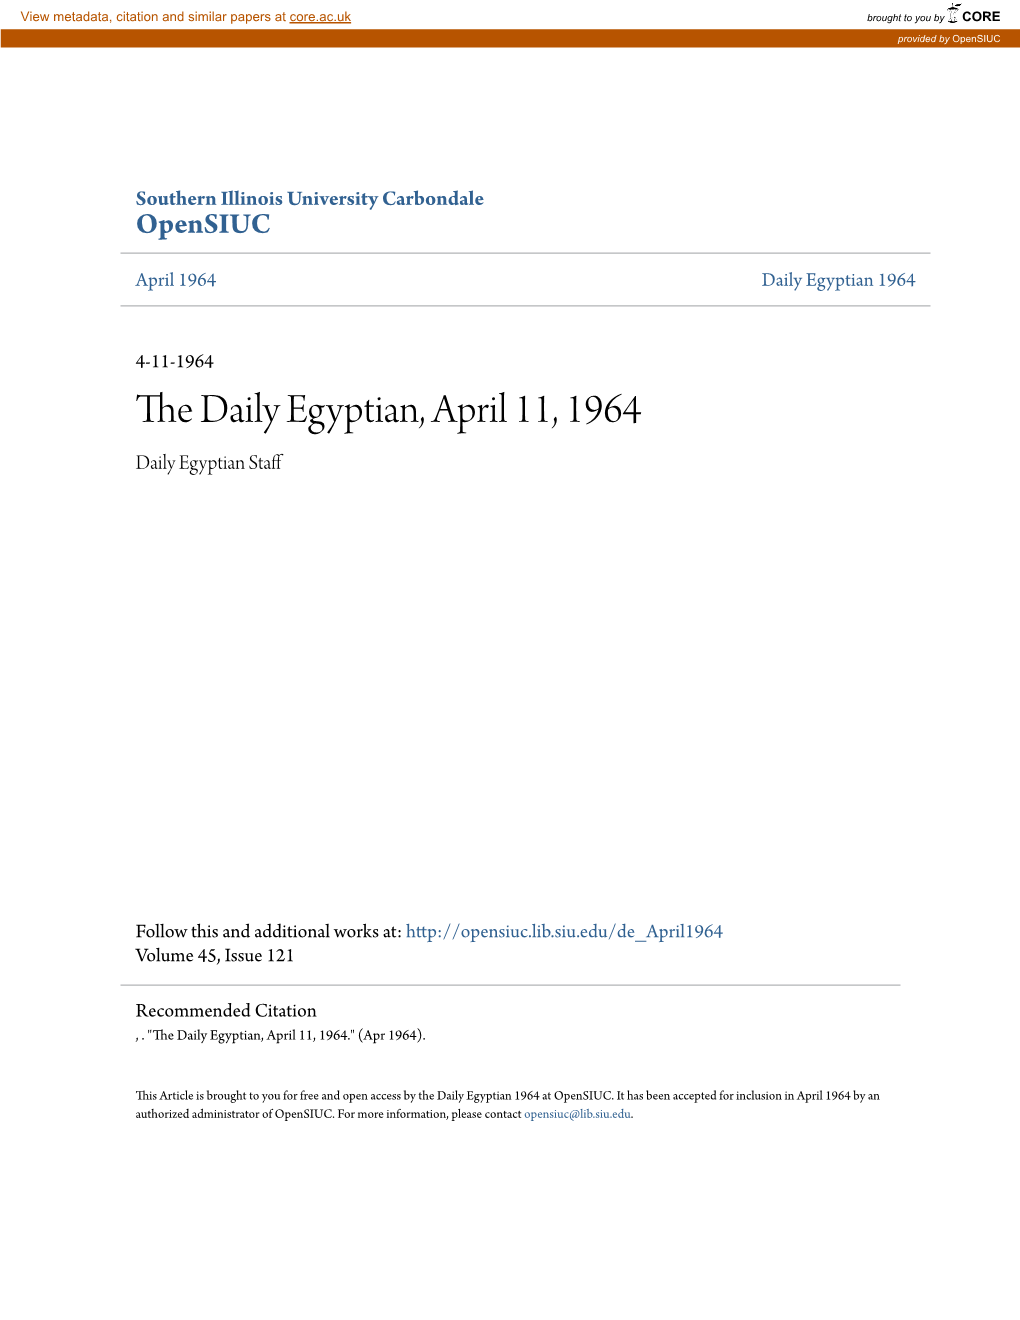 The Daily Egyptian, April 11, 1964